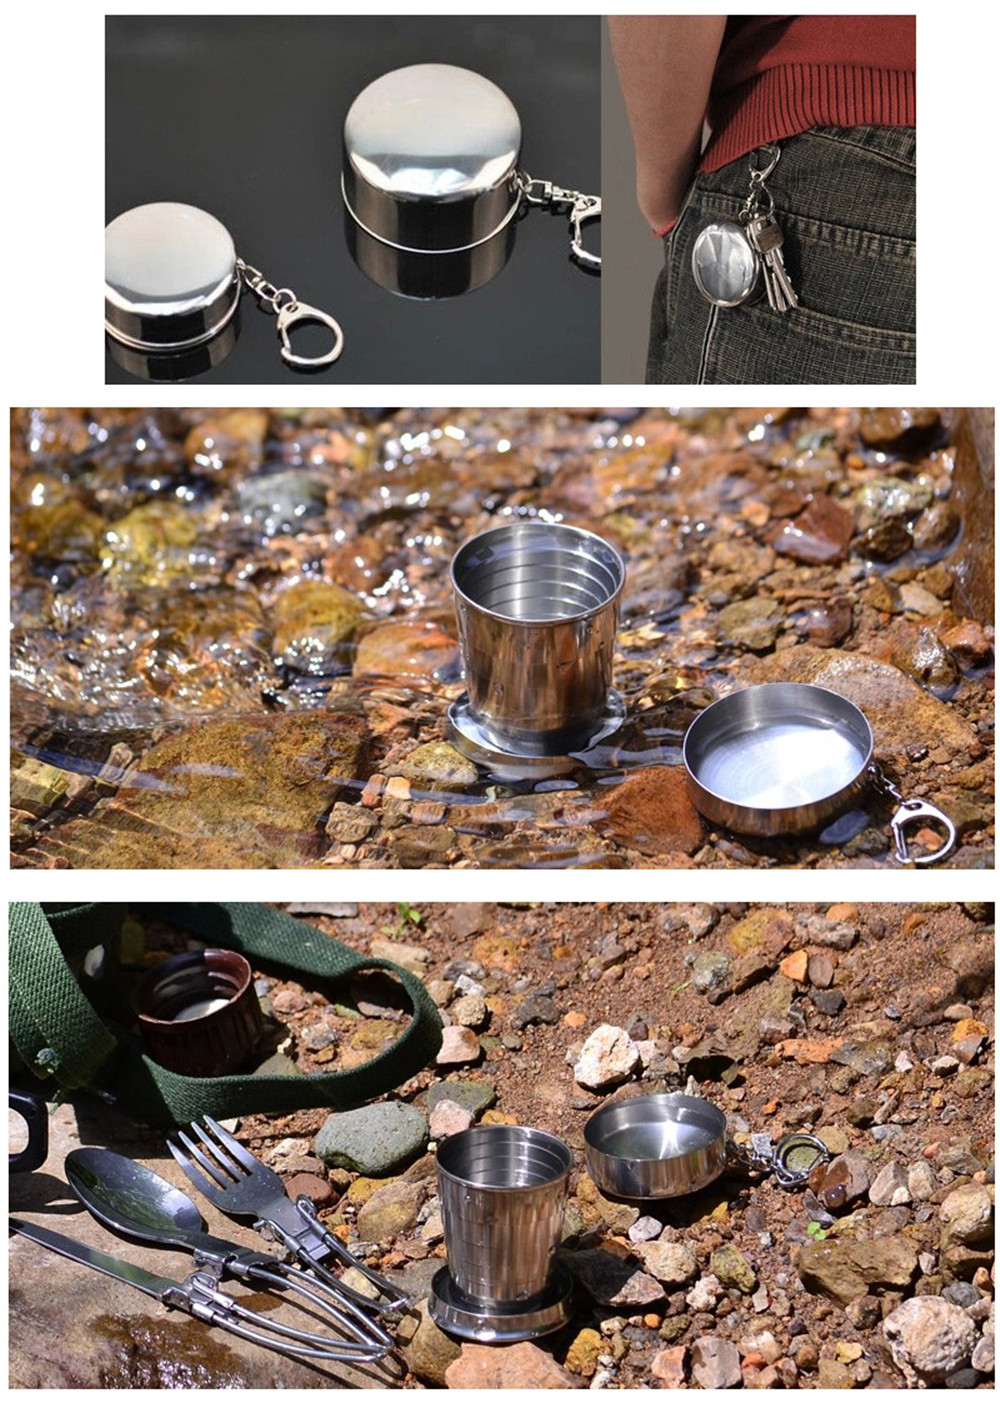 Stainless Steel Portable Outdoor Telescopic Collapsible Folding Cup